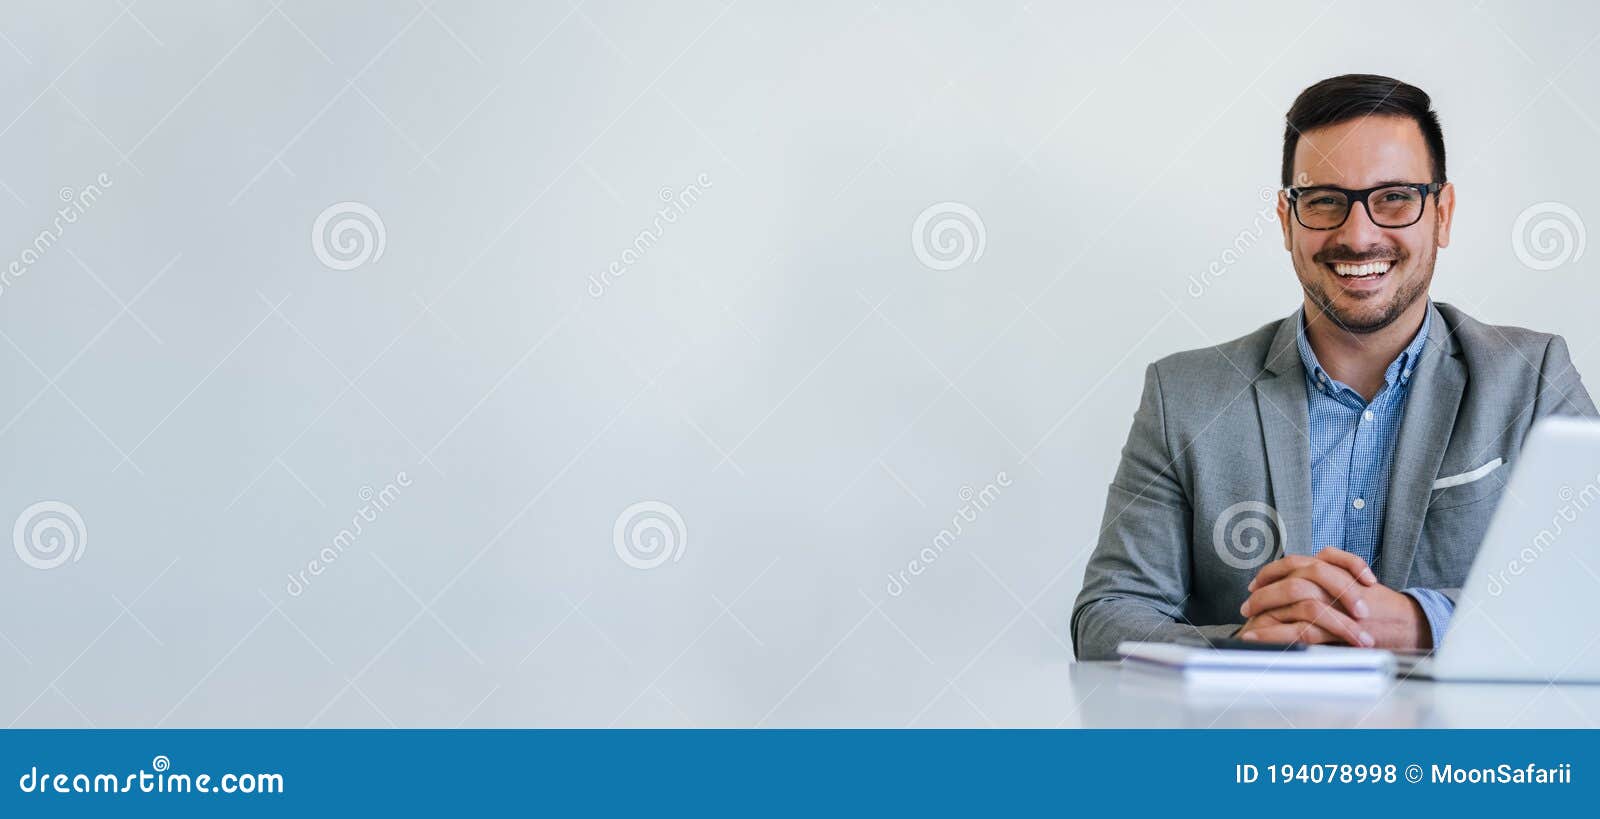 banner panorama portrait of young smiling cheerful businessman manager entrepreneur with eyeglasses sitting at desk in office or